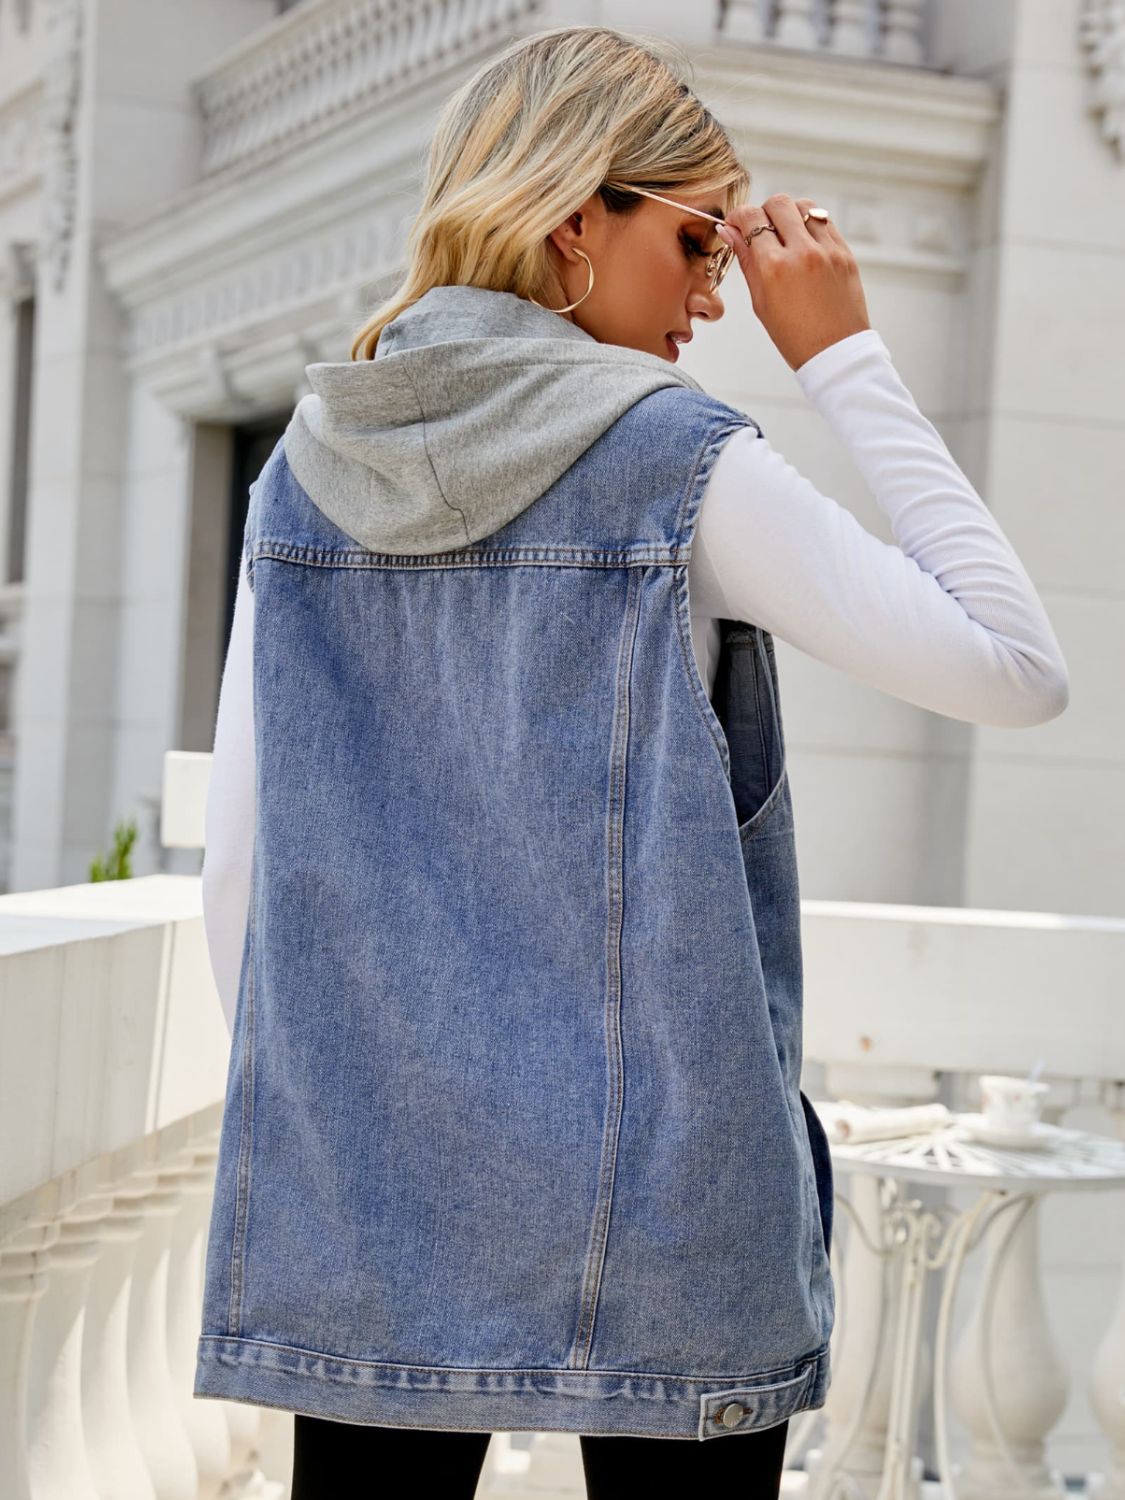 Drawstring Hooded Sleeveless Denim Top with Pockets Print on any thing USA/STOD clothes